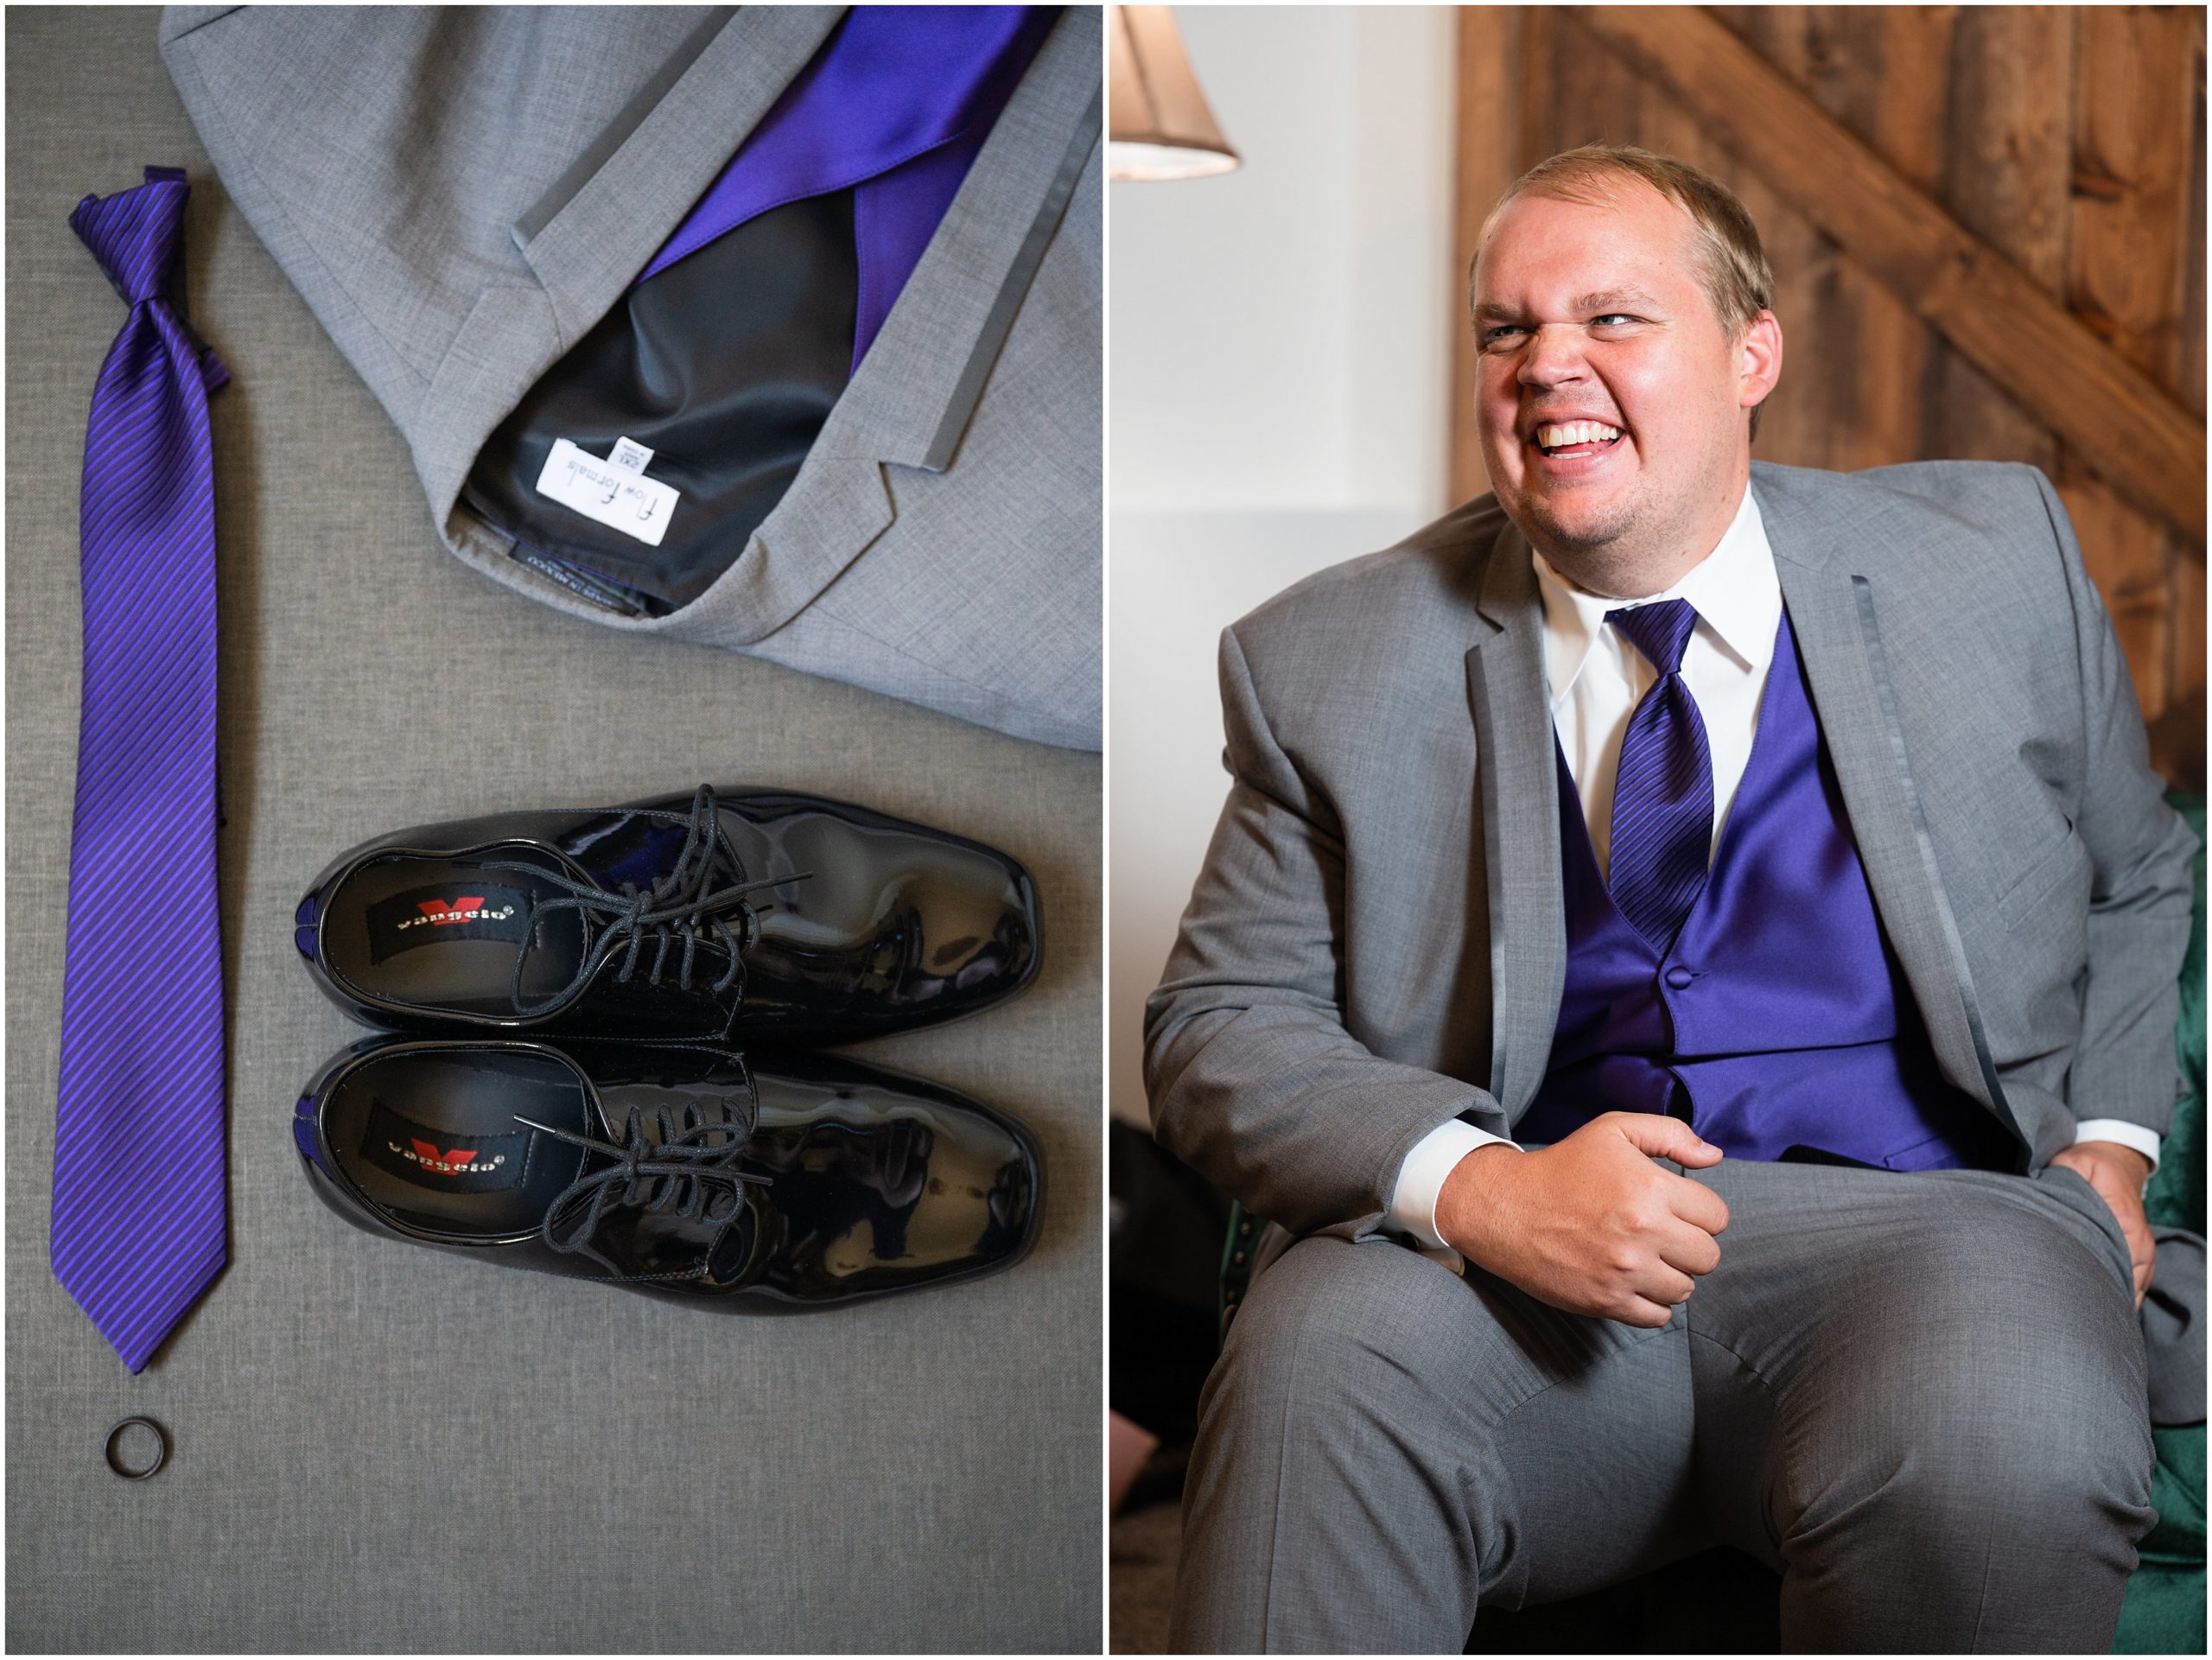 Groom and Groomsmen in grey suits getting ready | Orchid Inspired Summer Wedding at Oak Hills Utah | Jessie and Dallin Photography